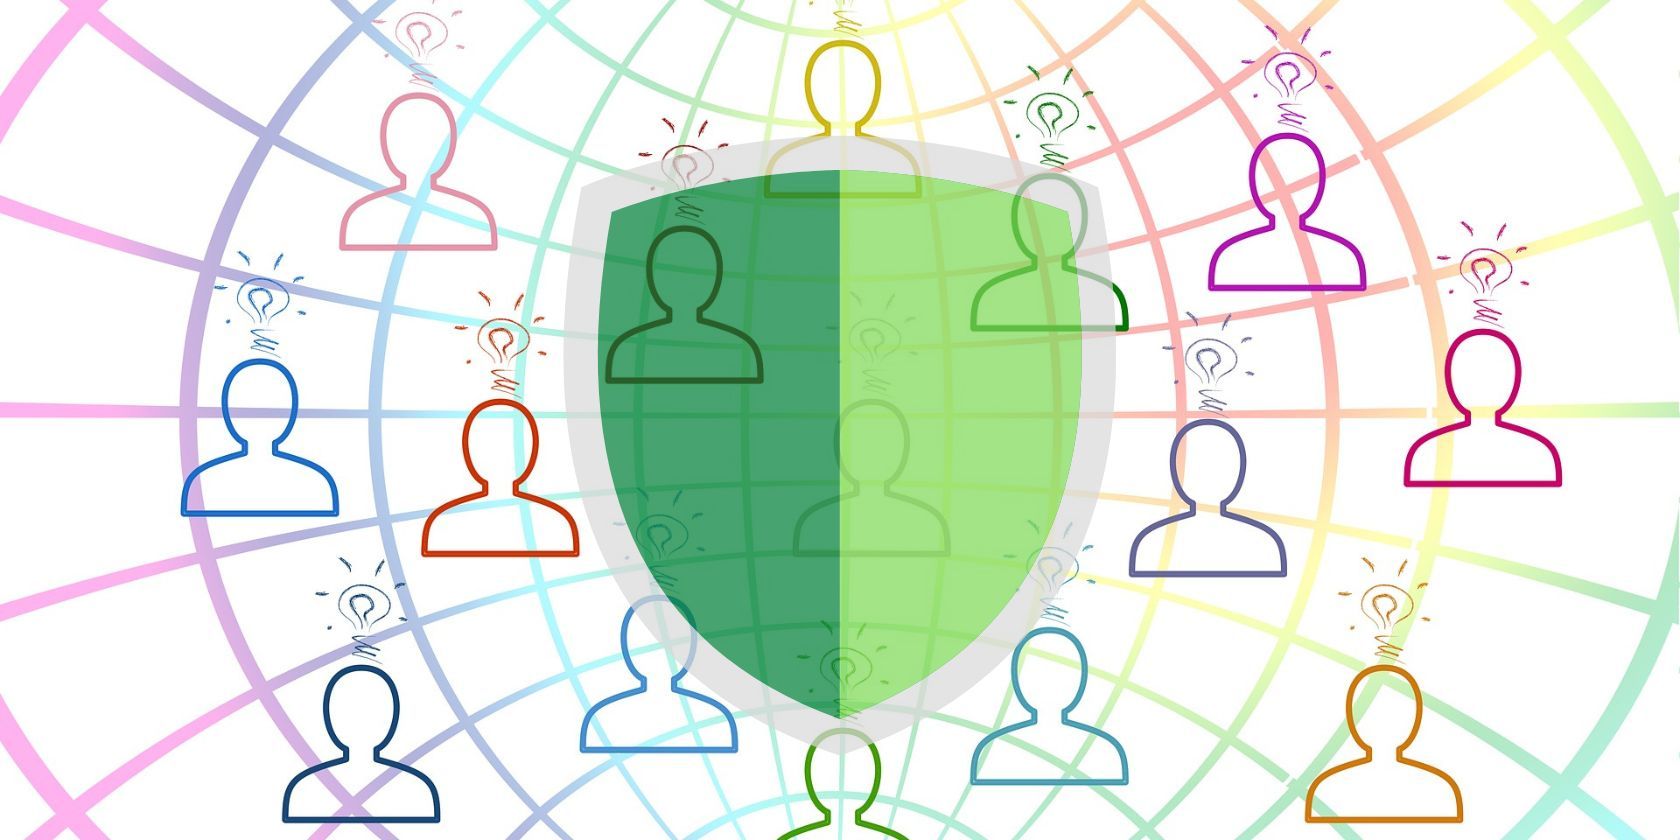 Green shield seen on an image representing crowdsourcing 